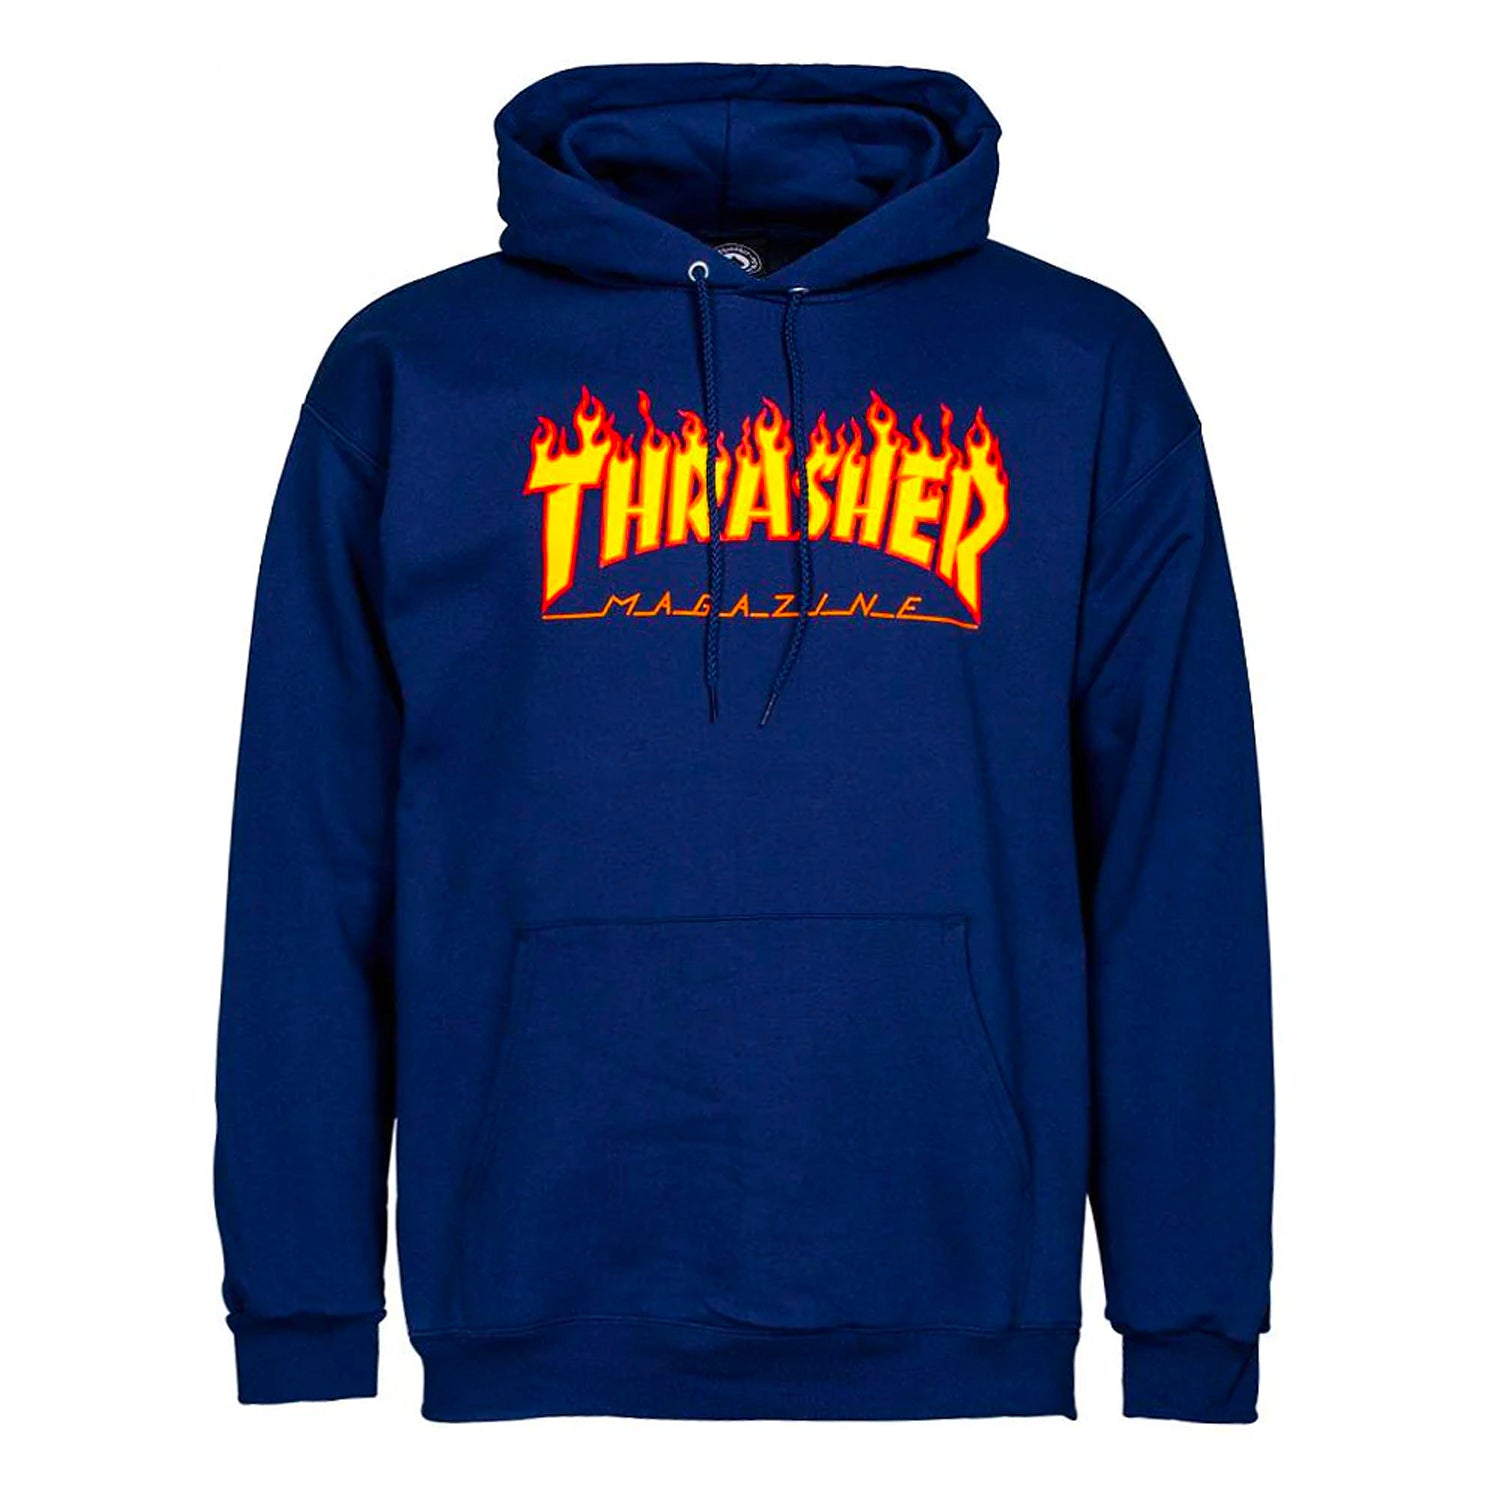 Thrasher - Flame Logo - Hooded Sweat - Navy - Prime Delux Store